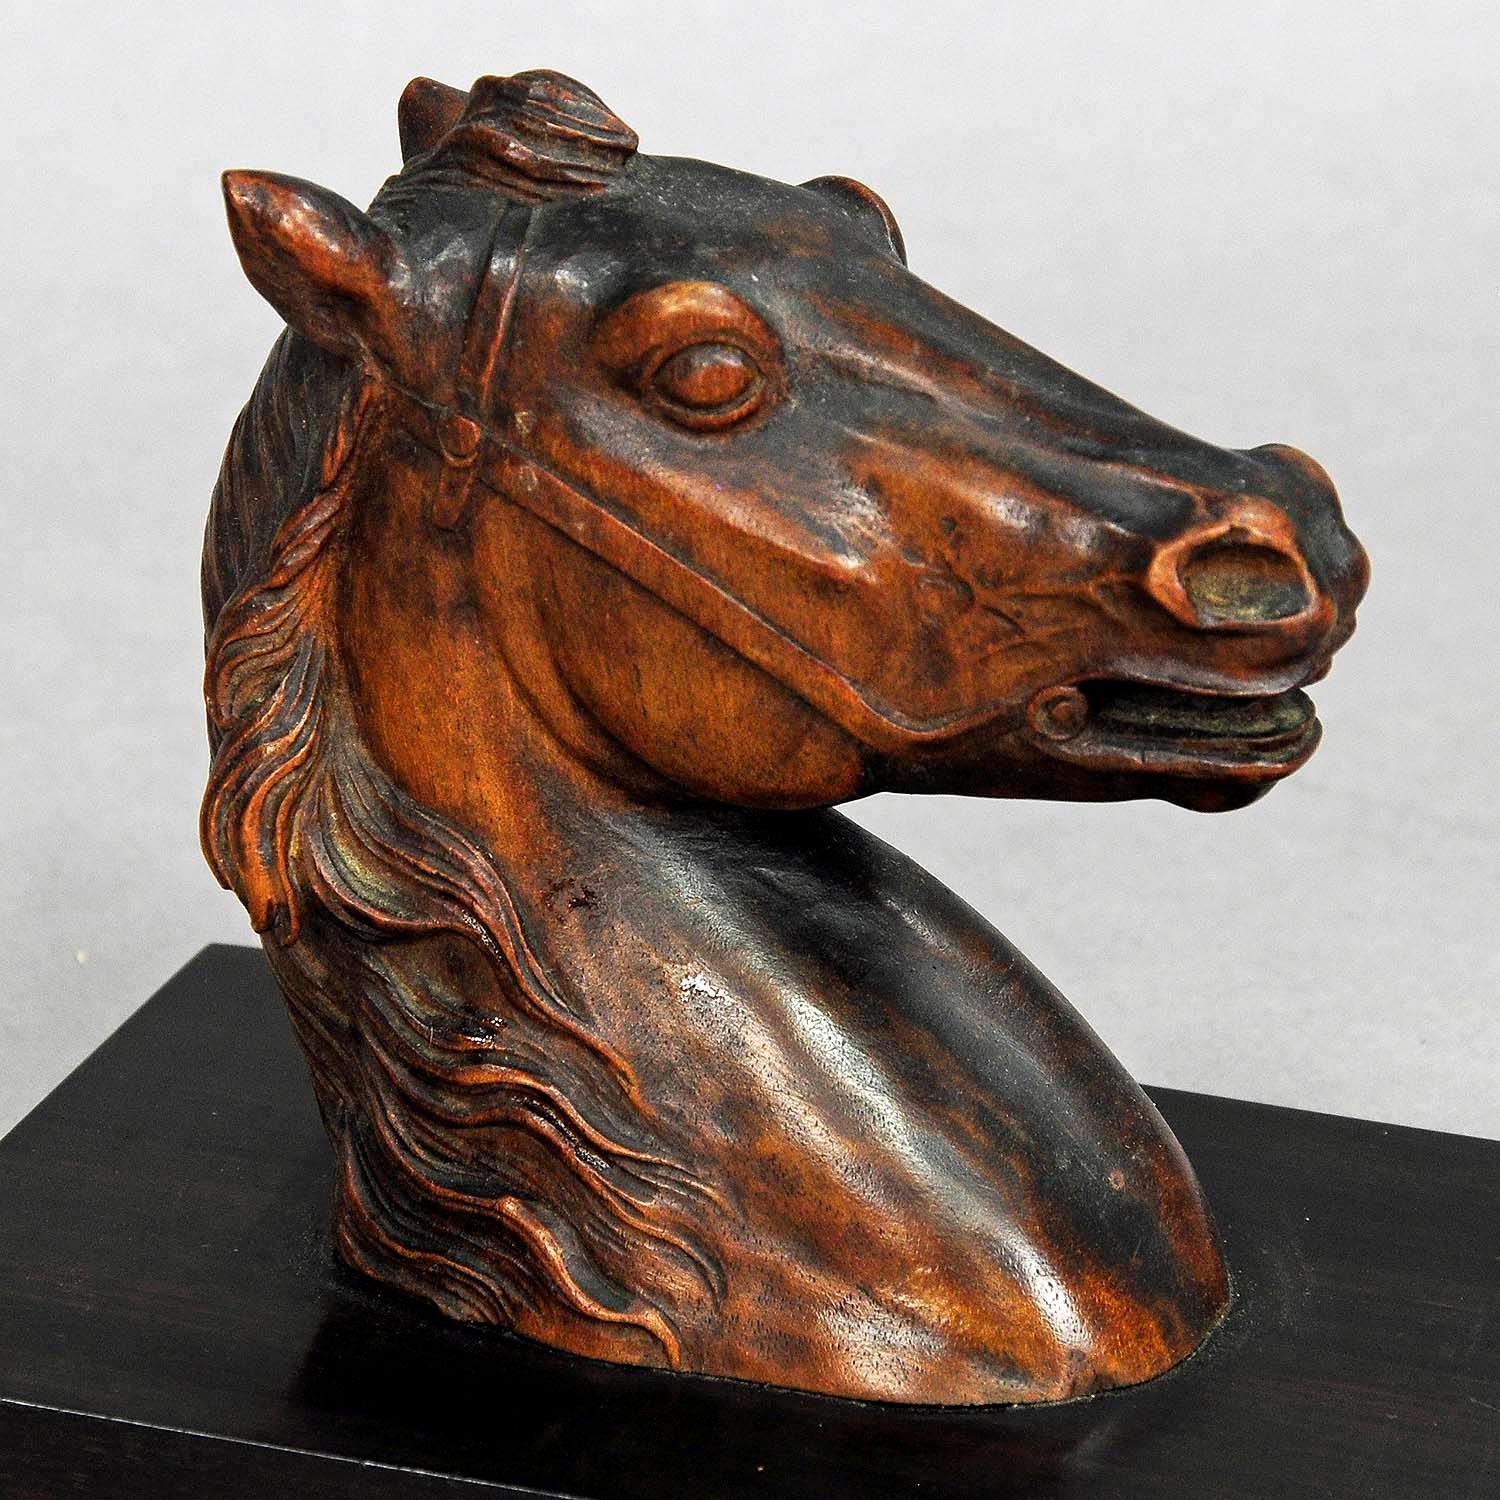 A great wooden carved head of a horse. It is mounted on a wooden base - usable as desk decoration or paper weight. Made in Germany ca. 1920.

Measures: Width 4.13